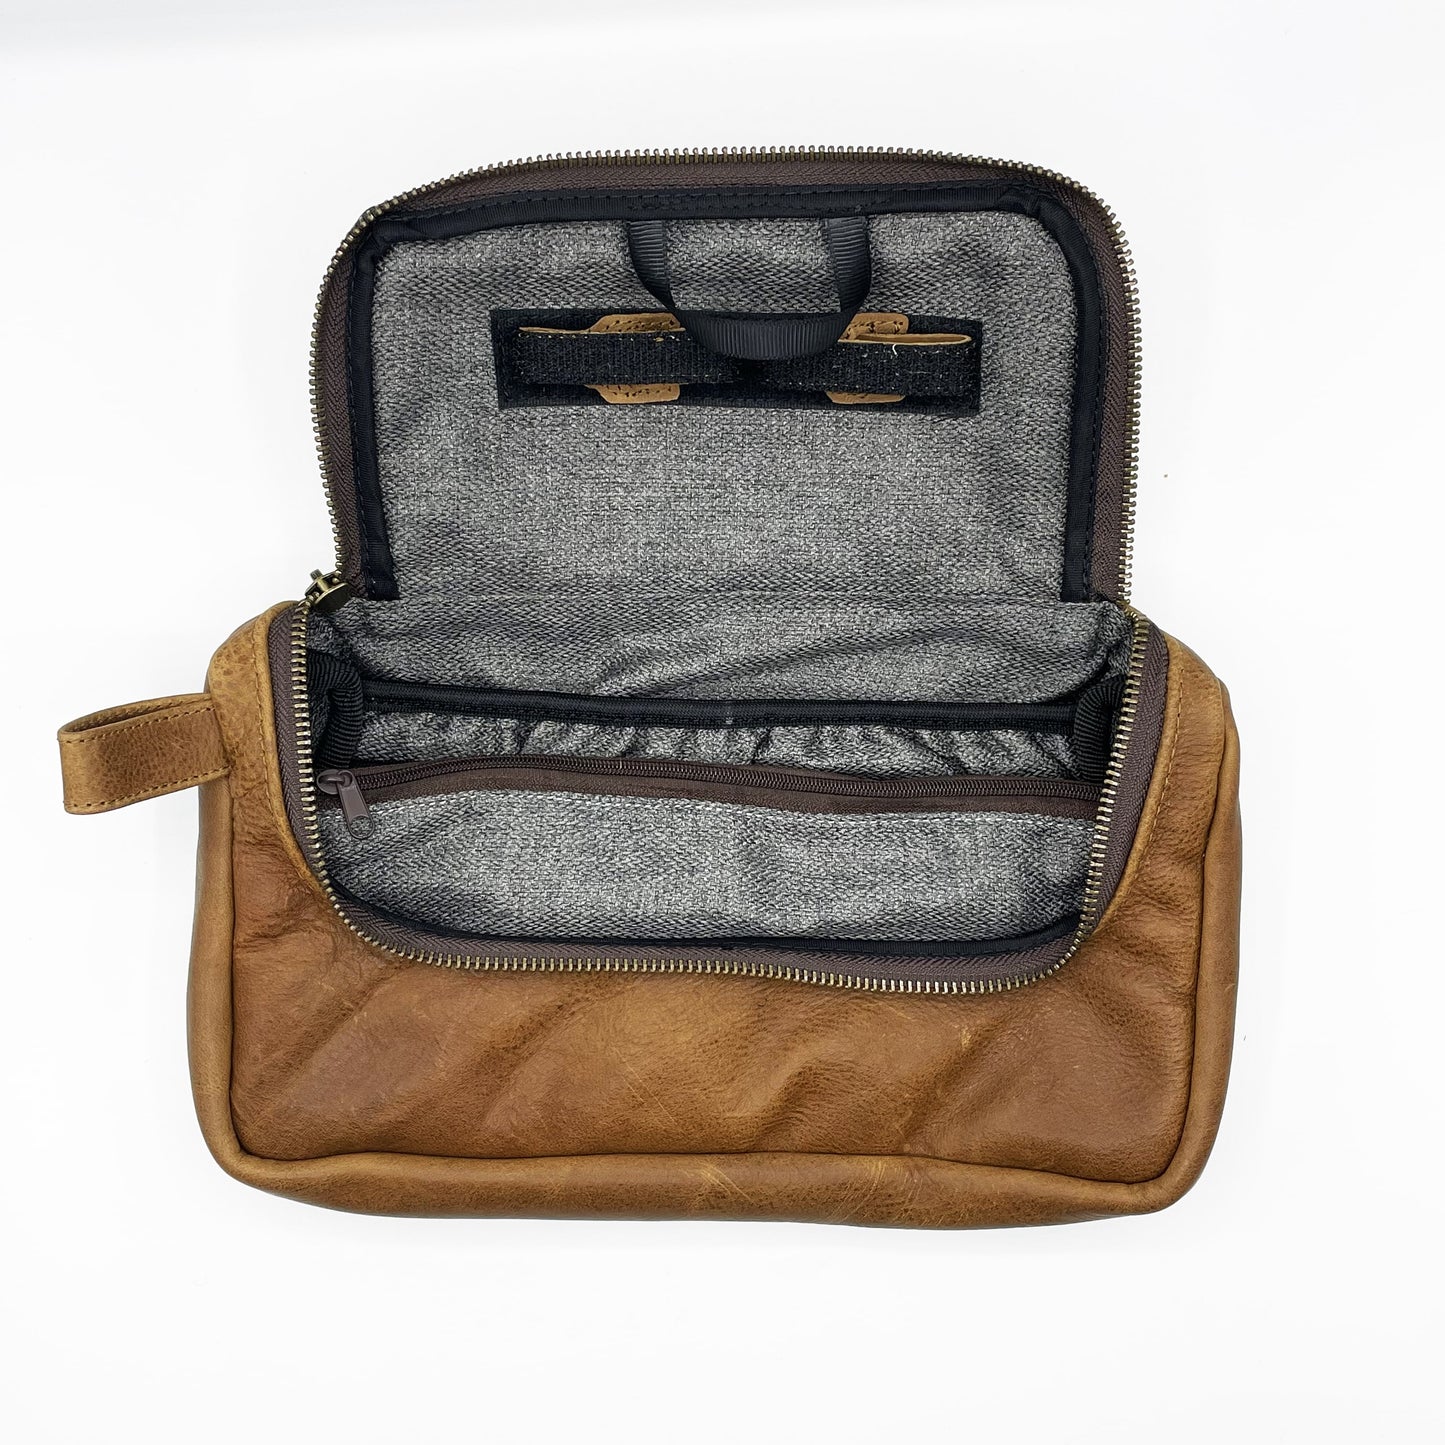 NEW Brown Leather Travel Media Pouch - Great Useful Stuff